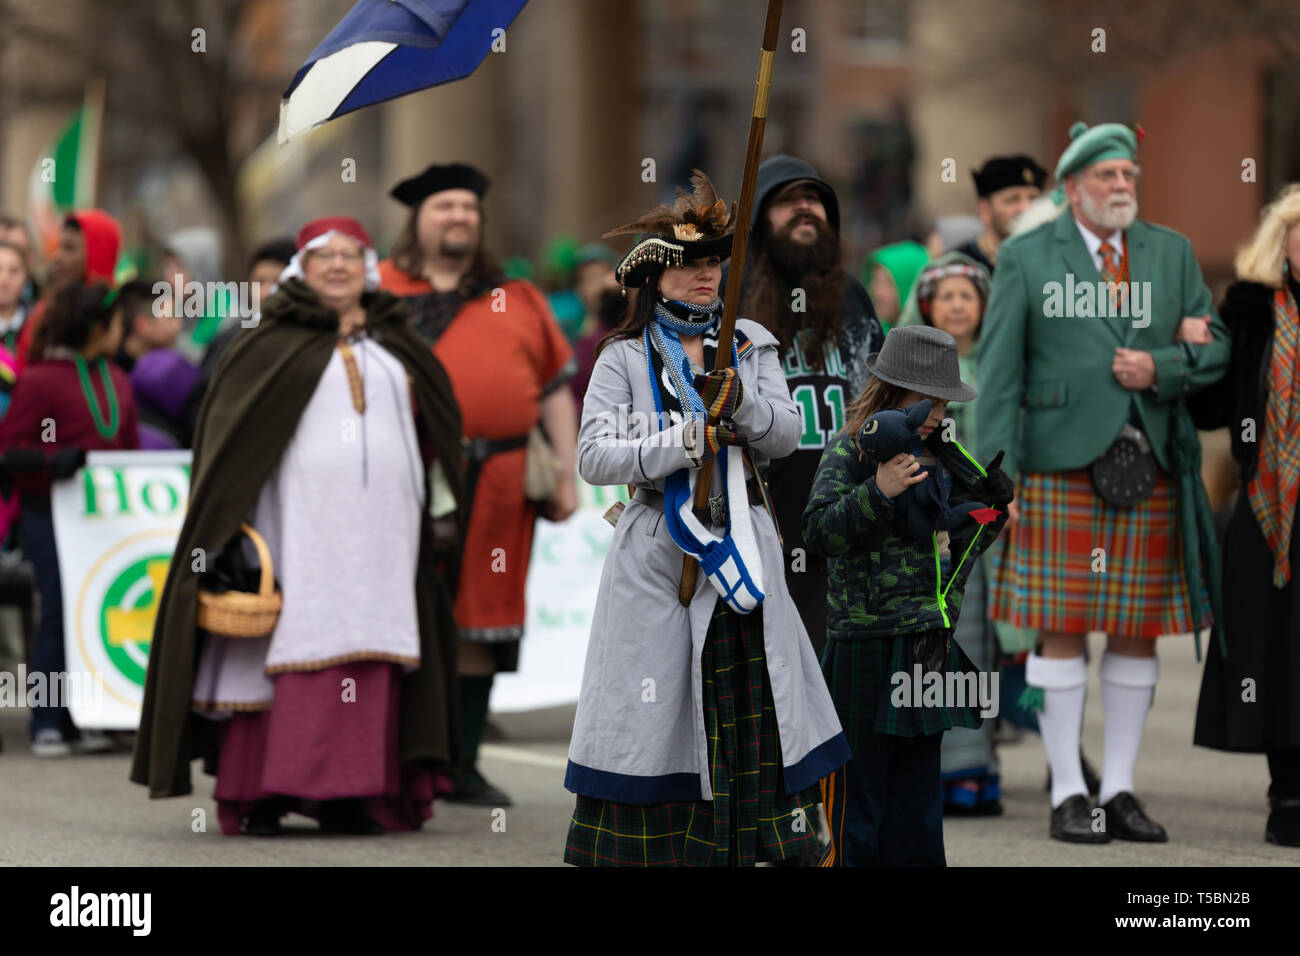 Indianapolis, Indiana, USA - March 15, 2019: St. Patrick's Day Parade, Men and women dress up in traditional Scottish clothing walking down the road d Stock Photo